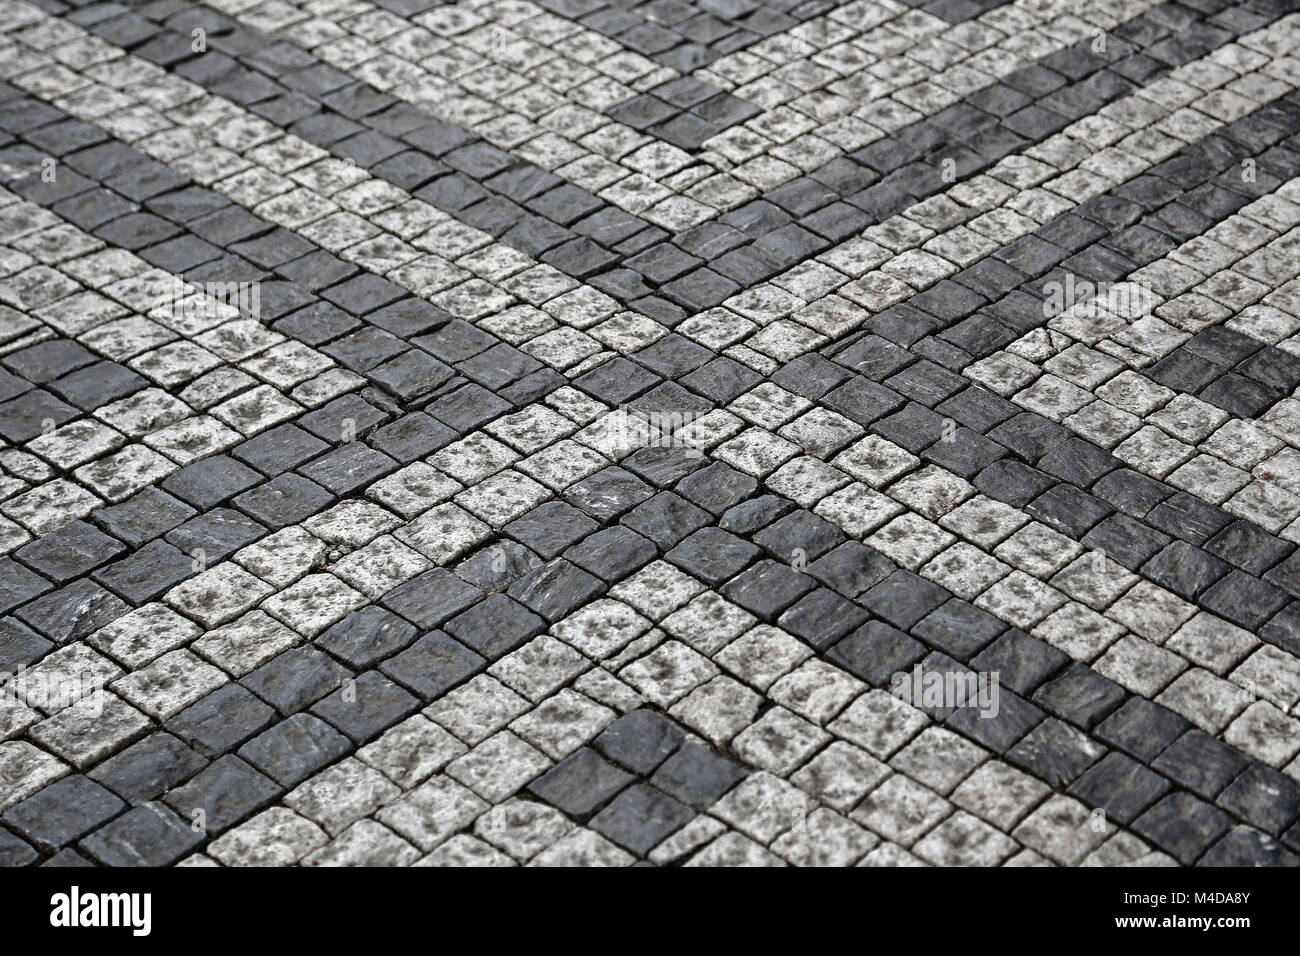 Paving stones street with pattern Stock Photo